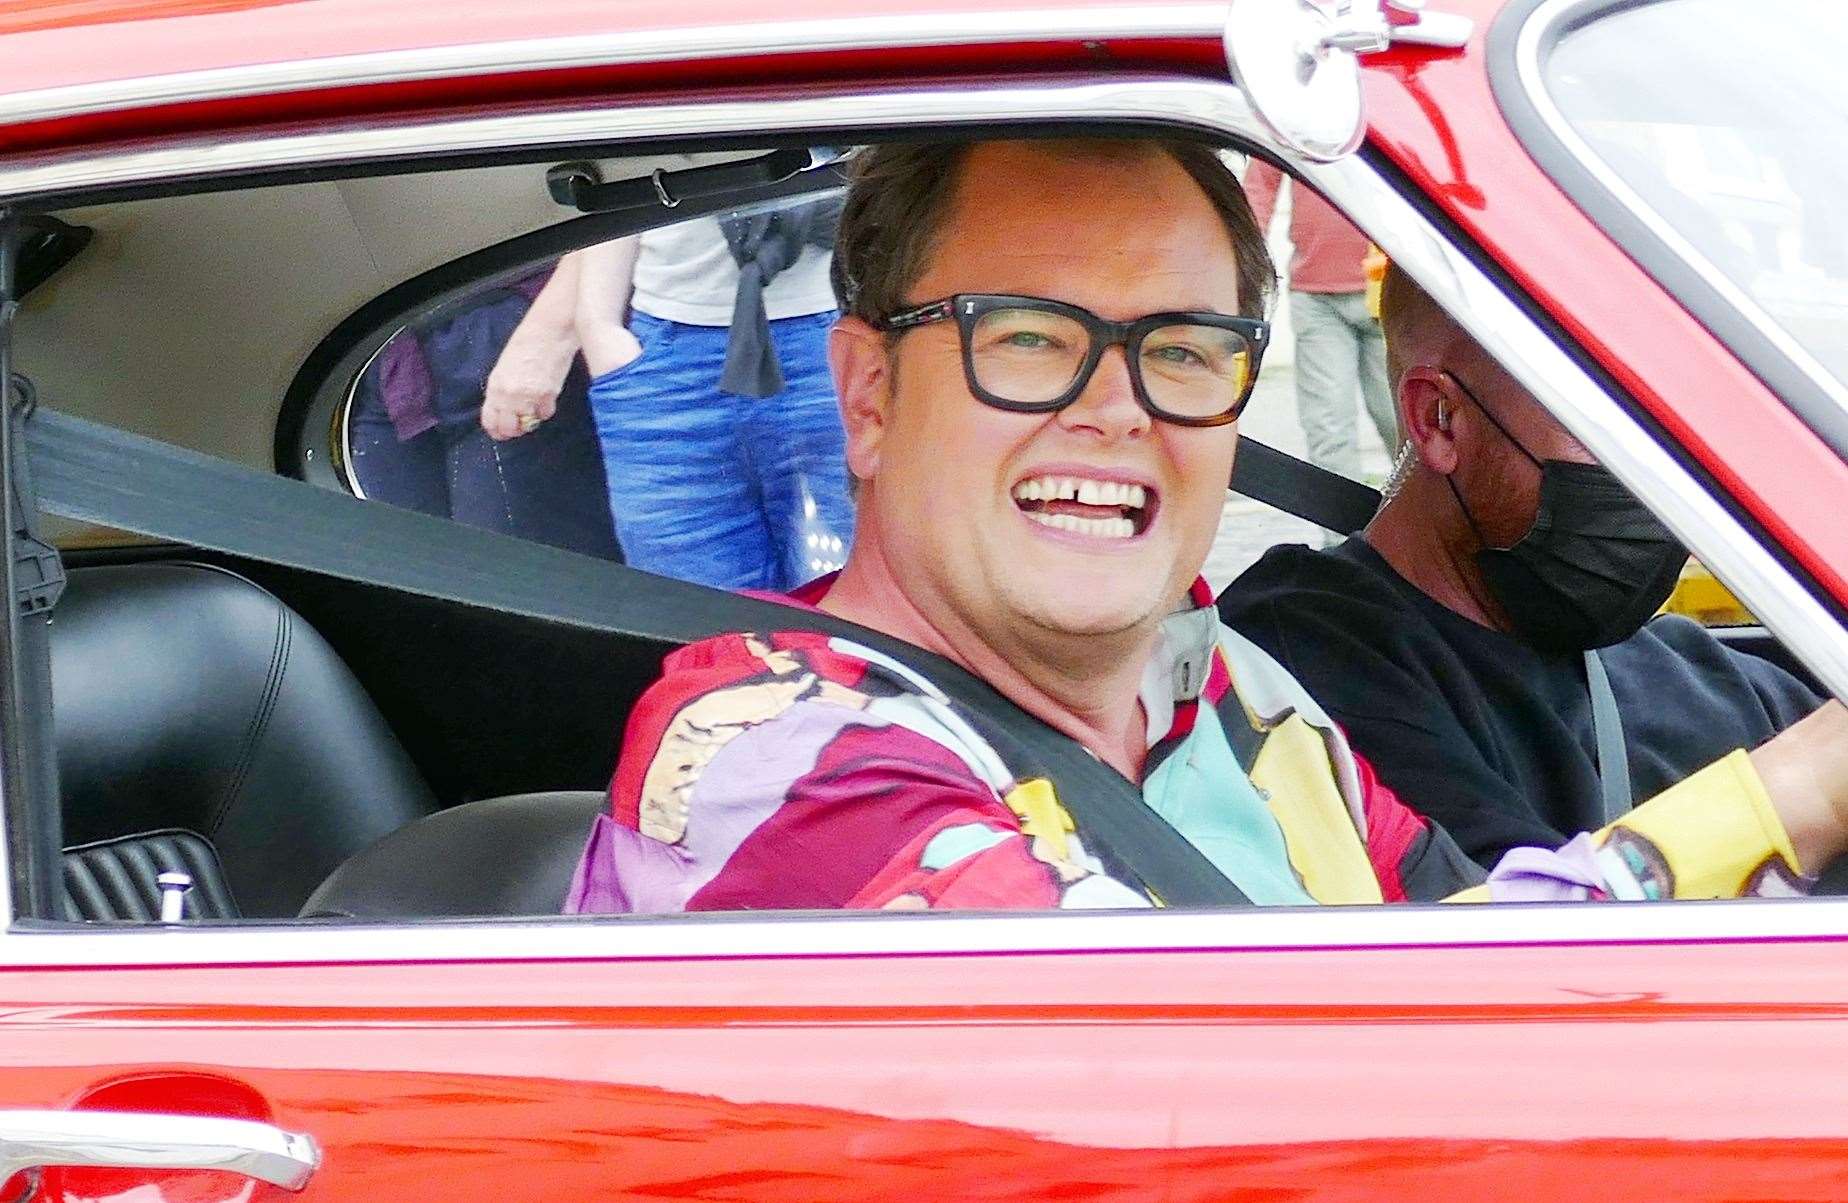 Alan Carr has been spotted in Margate, driving a red Ford Capri. Picture: Frank Leppard Photography